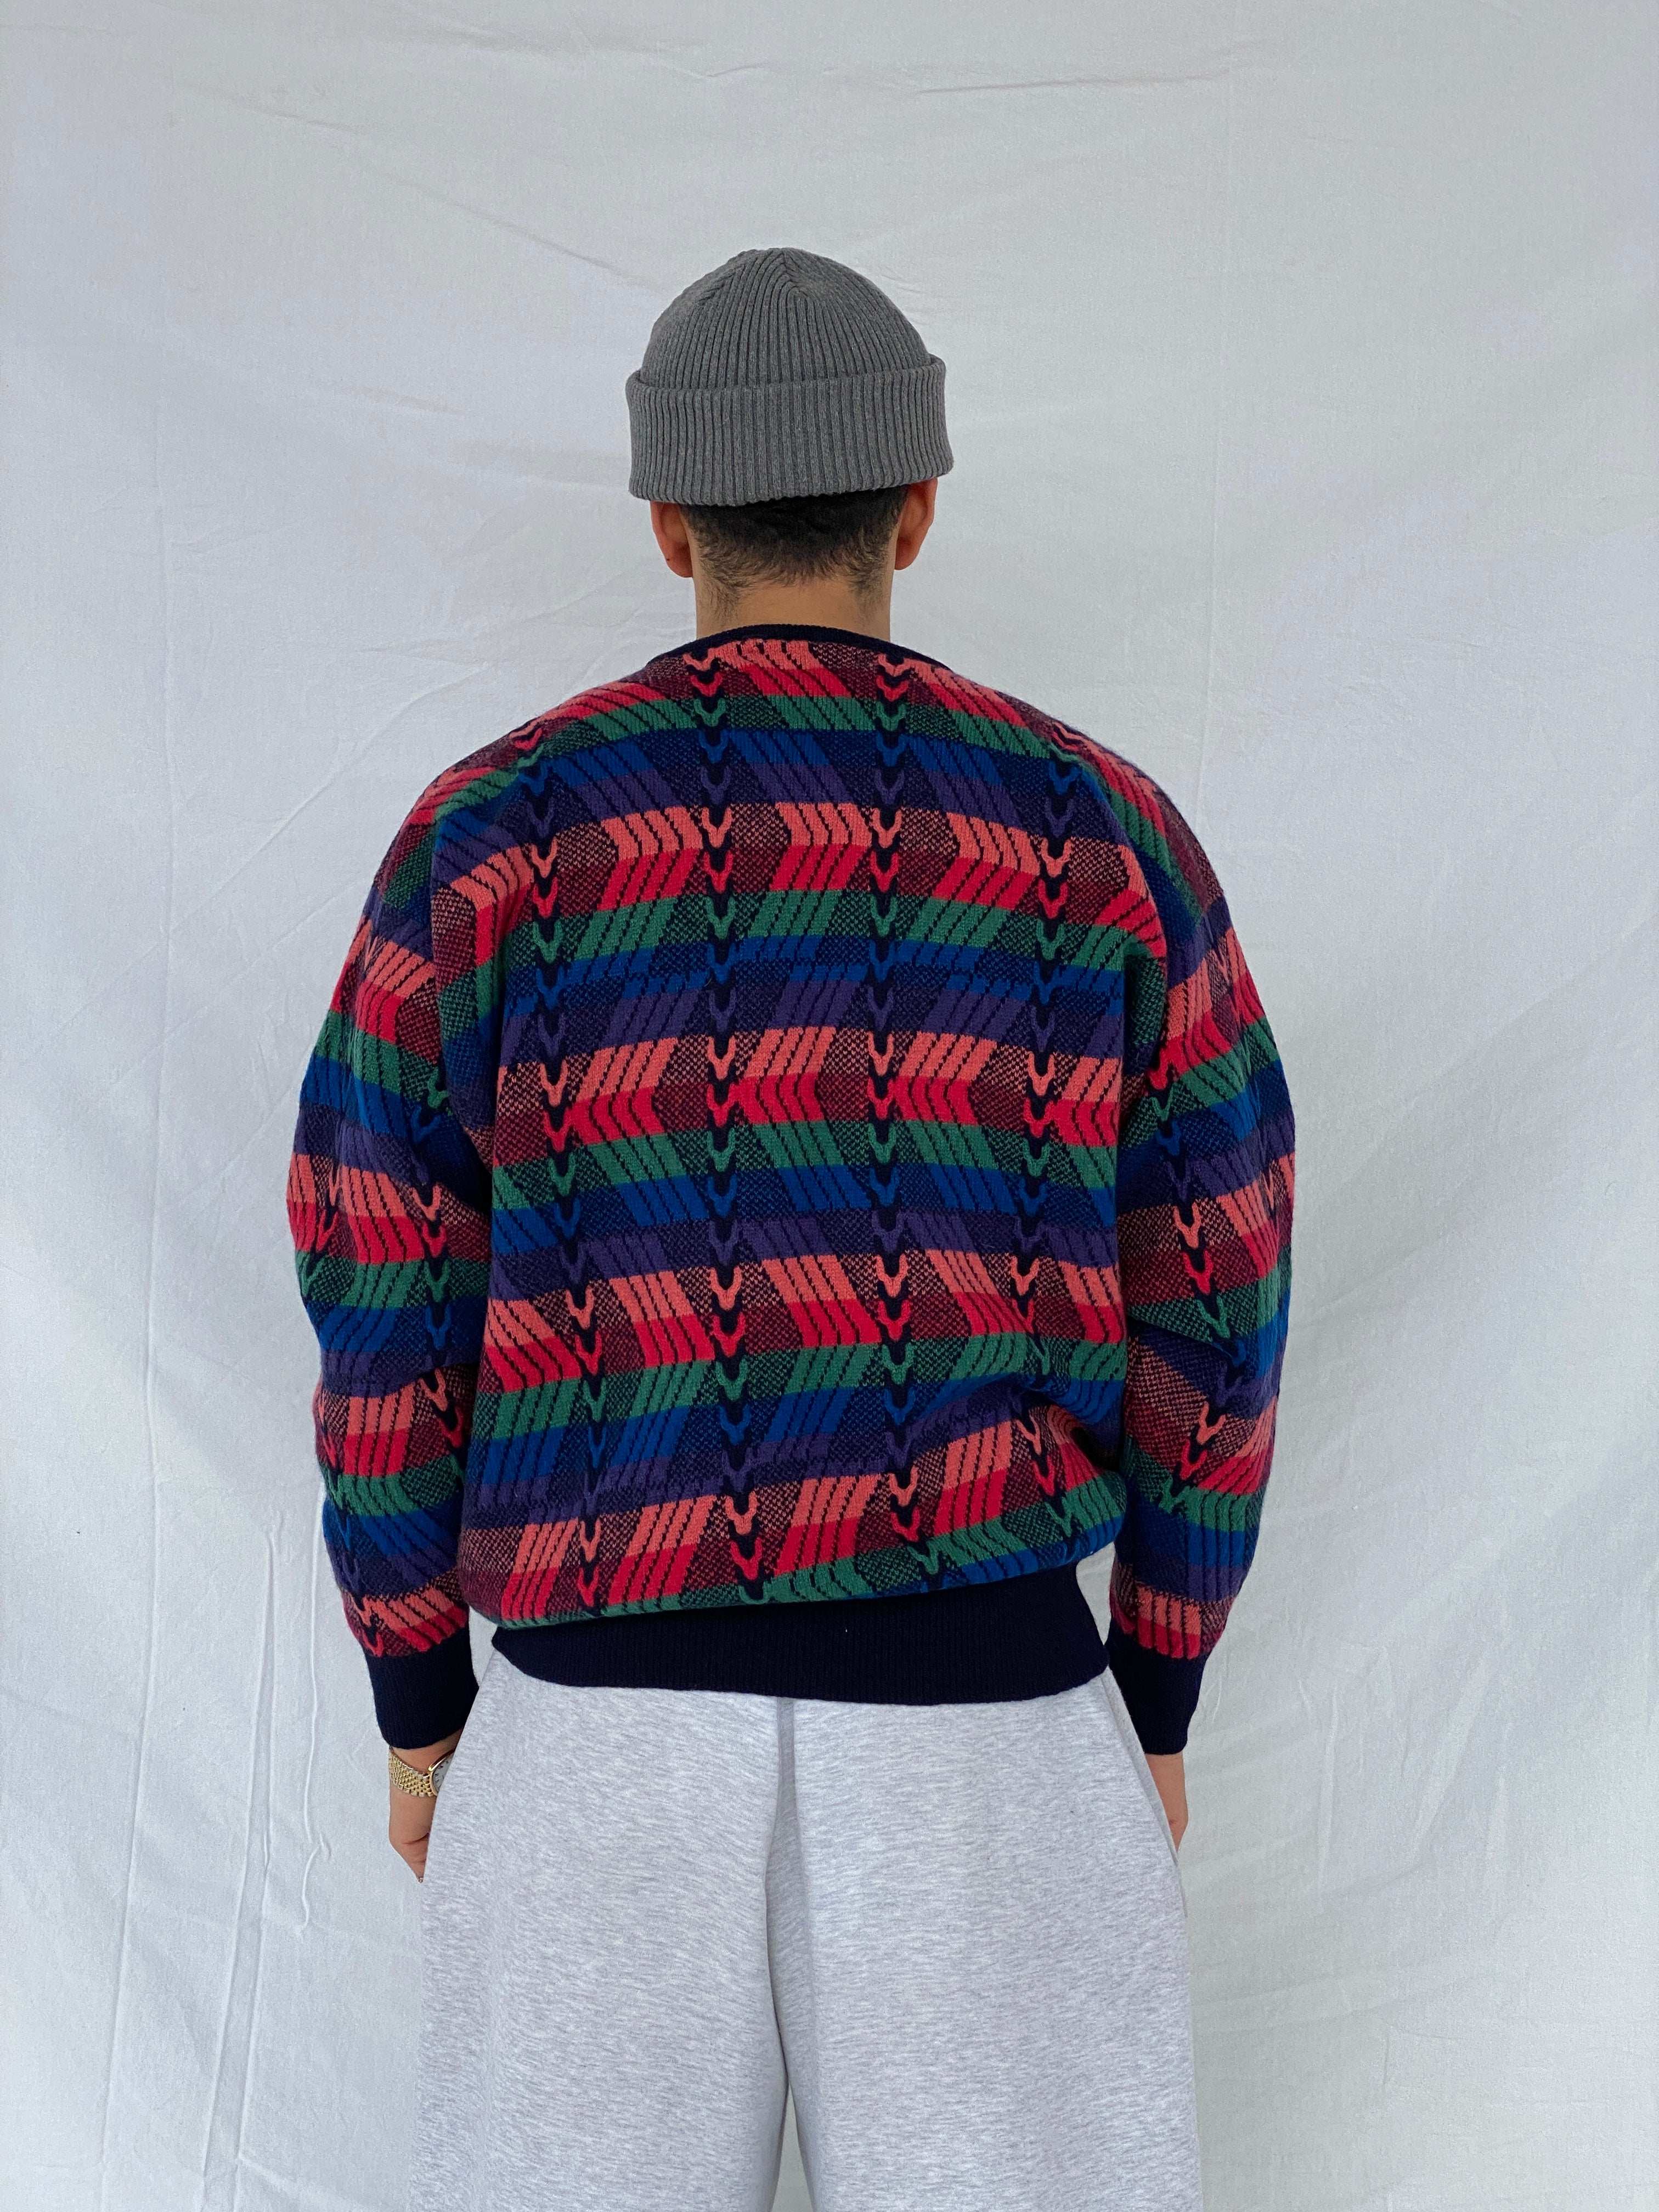 Vintage Nick Faldo Pringle Multicolored Knitted Sweater - Size M/L - Balagan Vintage Sweater 80s, 90s, Abdullah, knitted sweater, sweater, vintage sweater